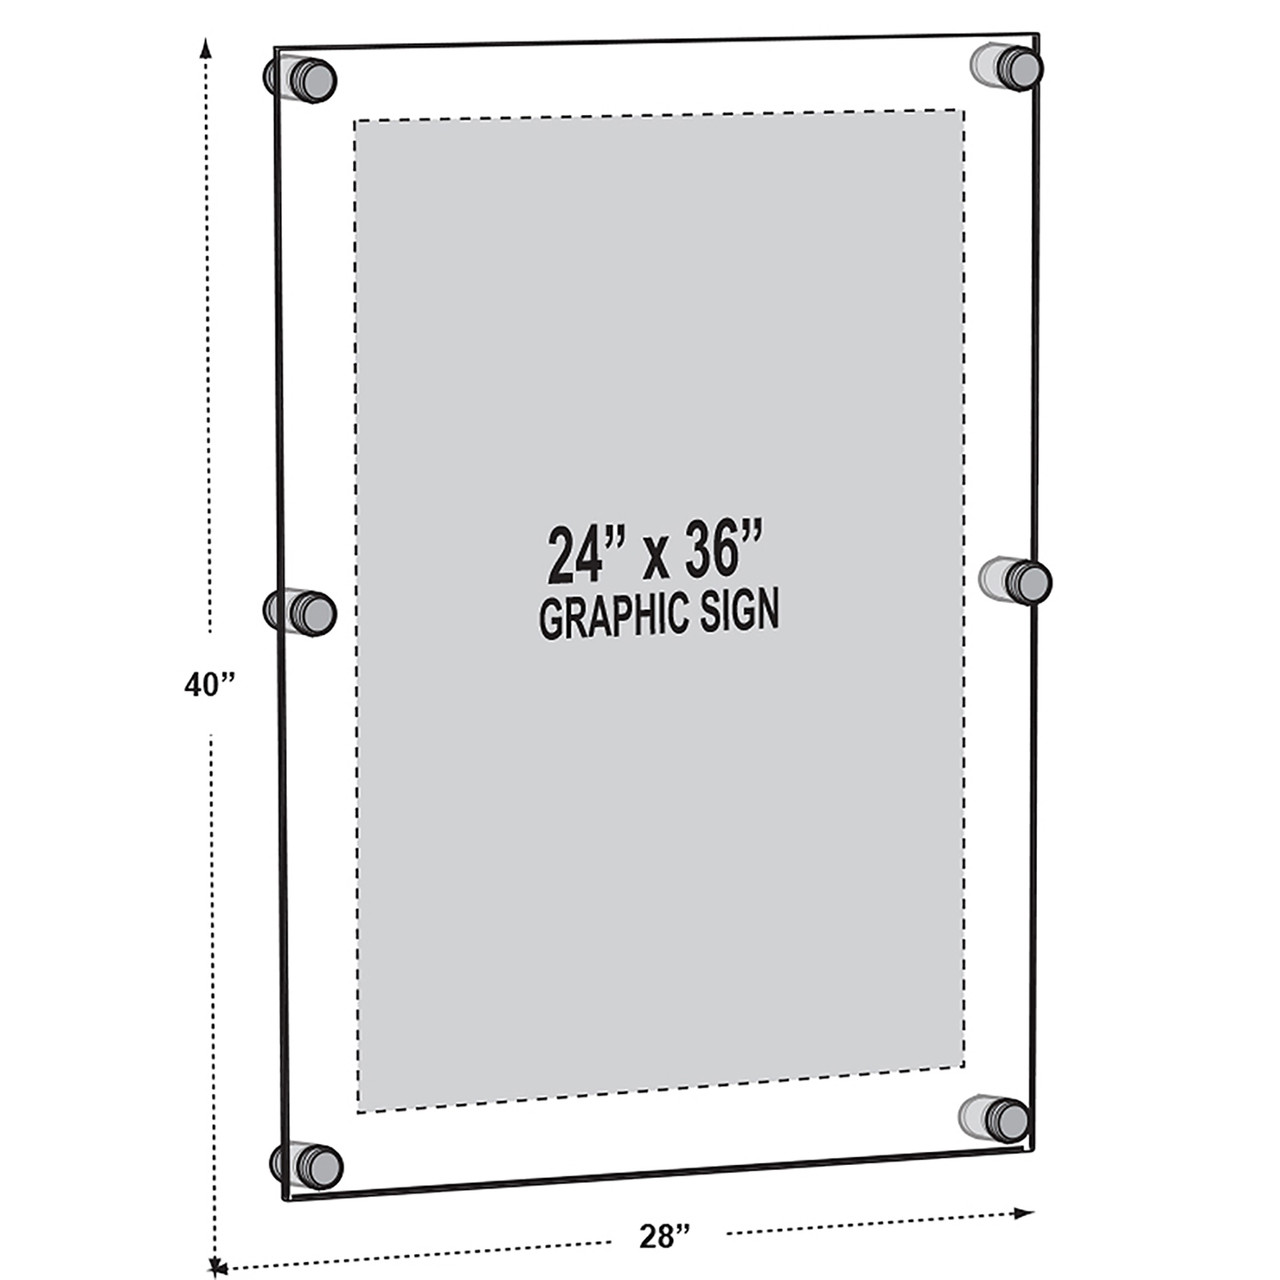 Floating Acrylic Wall Frame with Black Stand Off Caps: 24" x 36" Graphic  Size, Overall Frame Size: 28" x 40" Azar Displays